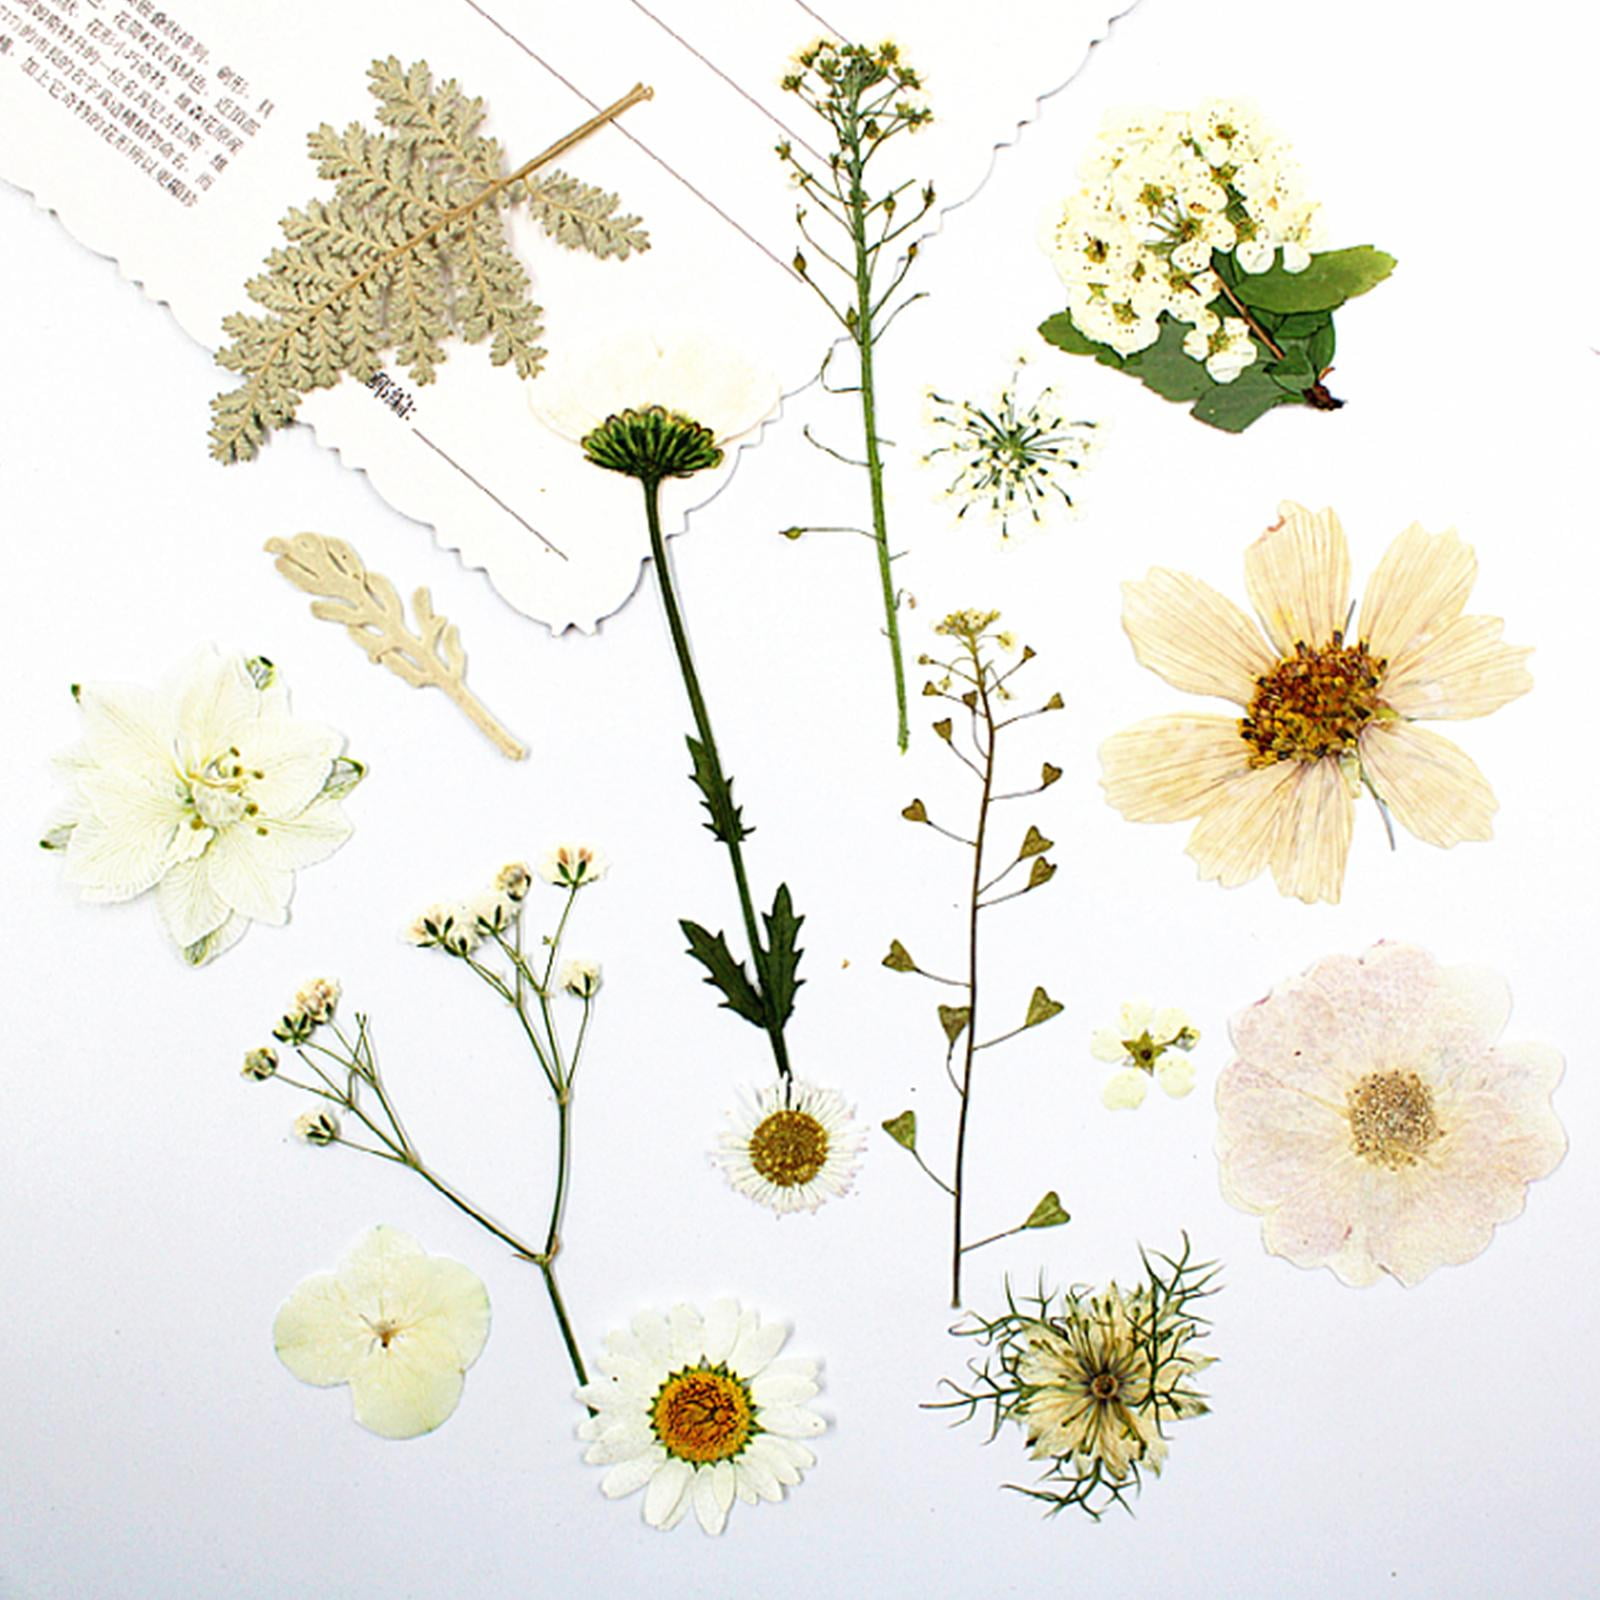 141pcs Real Nature Dried Pressed Flowers for Resin Mold Dry Pressing Floral Set for DIY Jewelry Making Nail Card Scrapbook Art Craft Decors Blossom